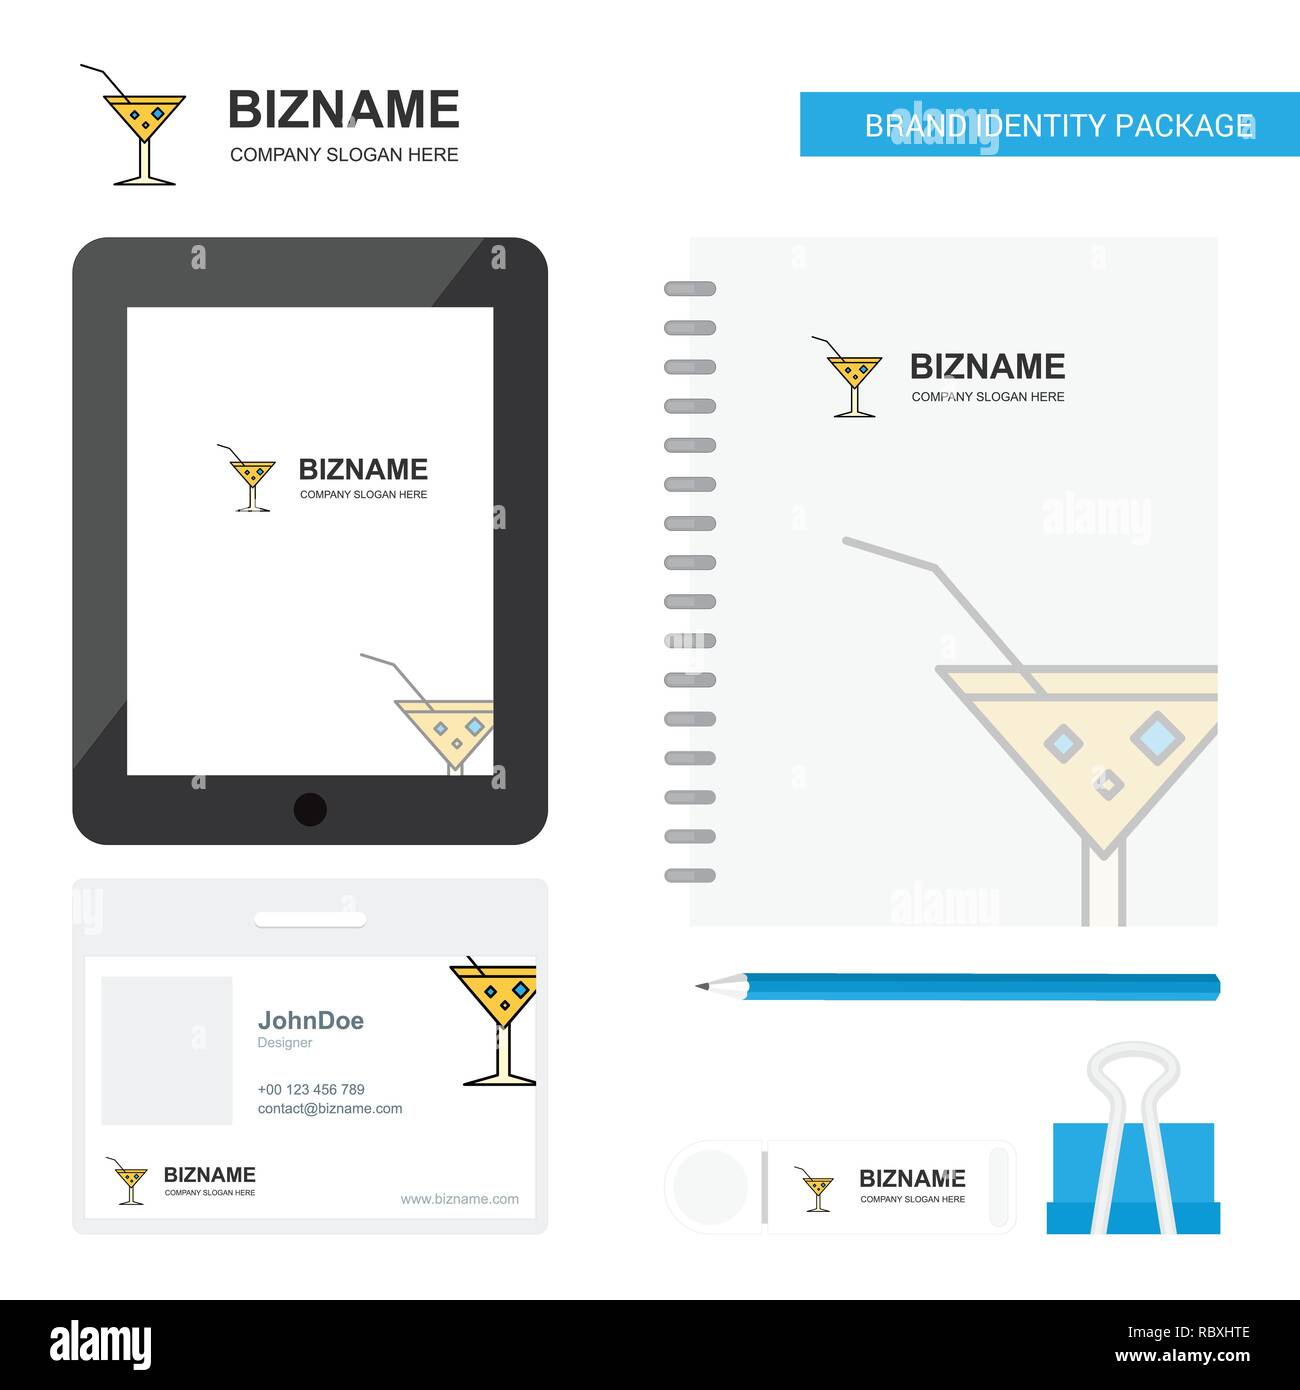 Drink Business Logo, Tab App, Diary PVC Employee Card and USB Brand Stationary Package Design Vector Template Stock Vector